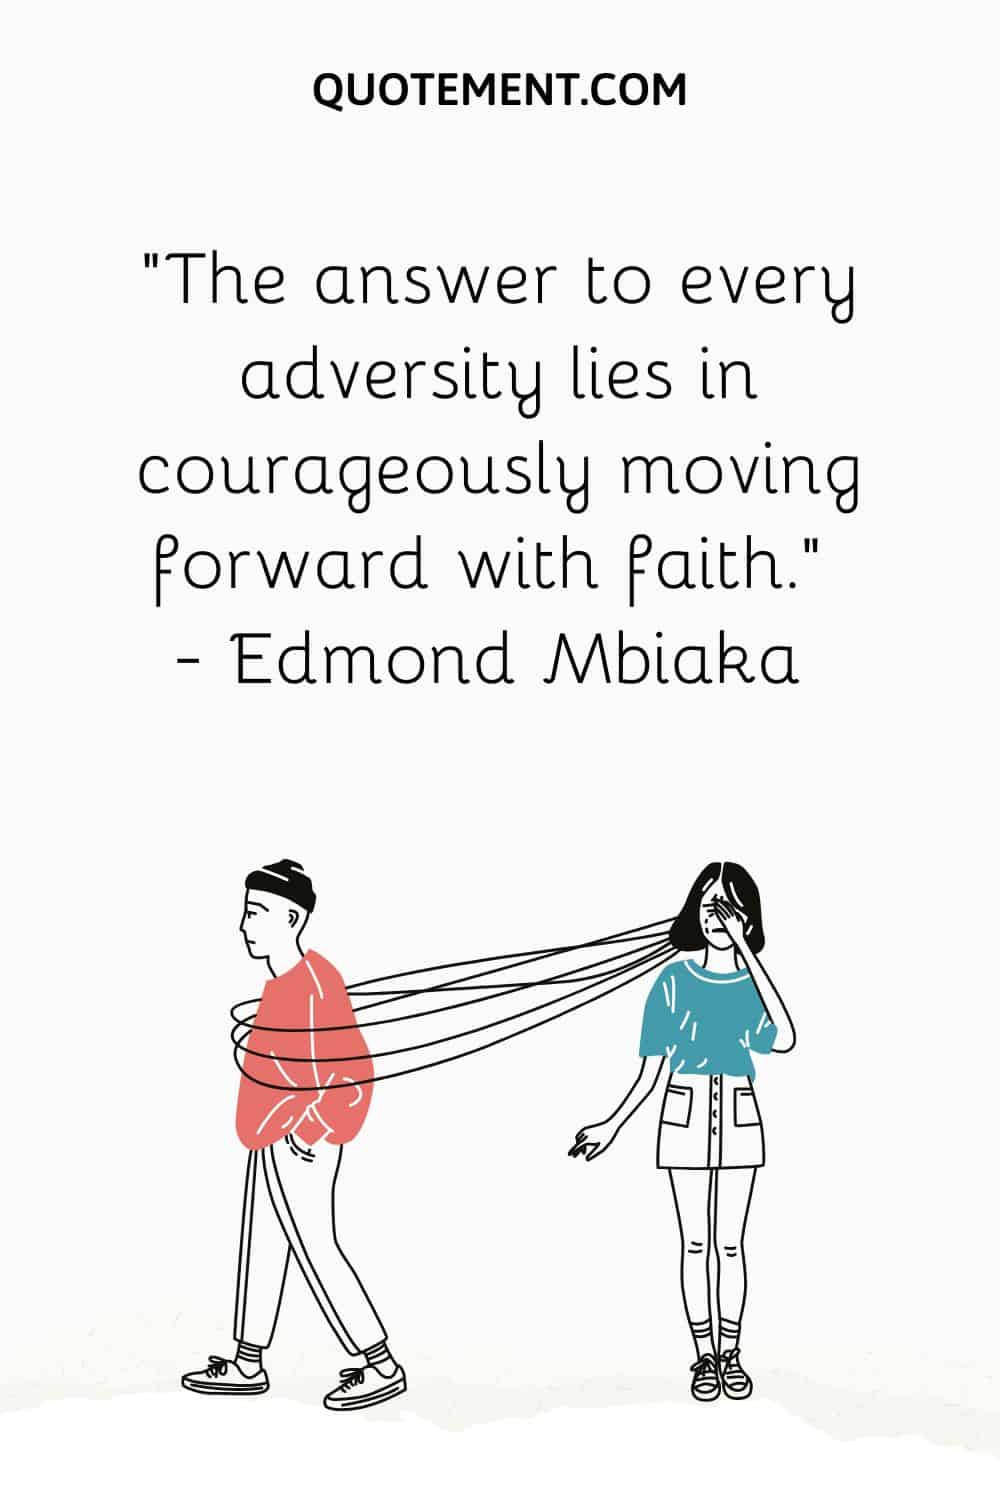 The answer to every adversity lies in courageously moving forward with faith